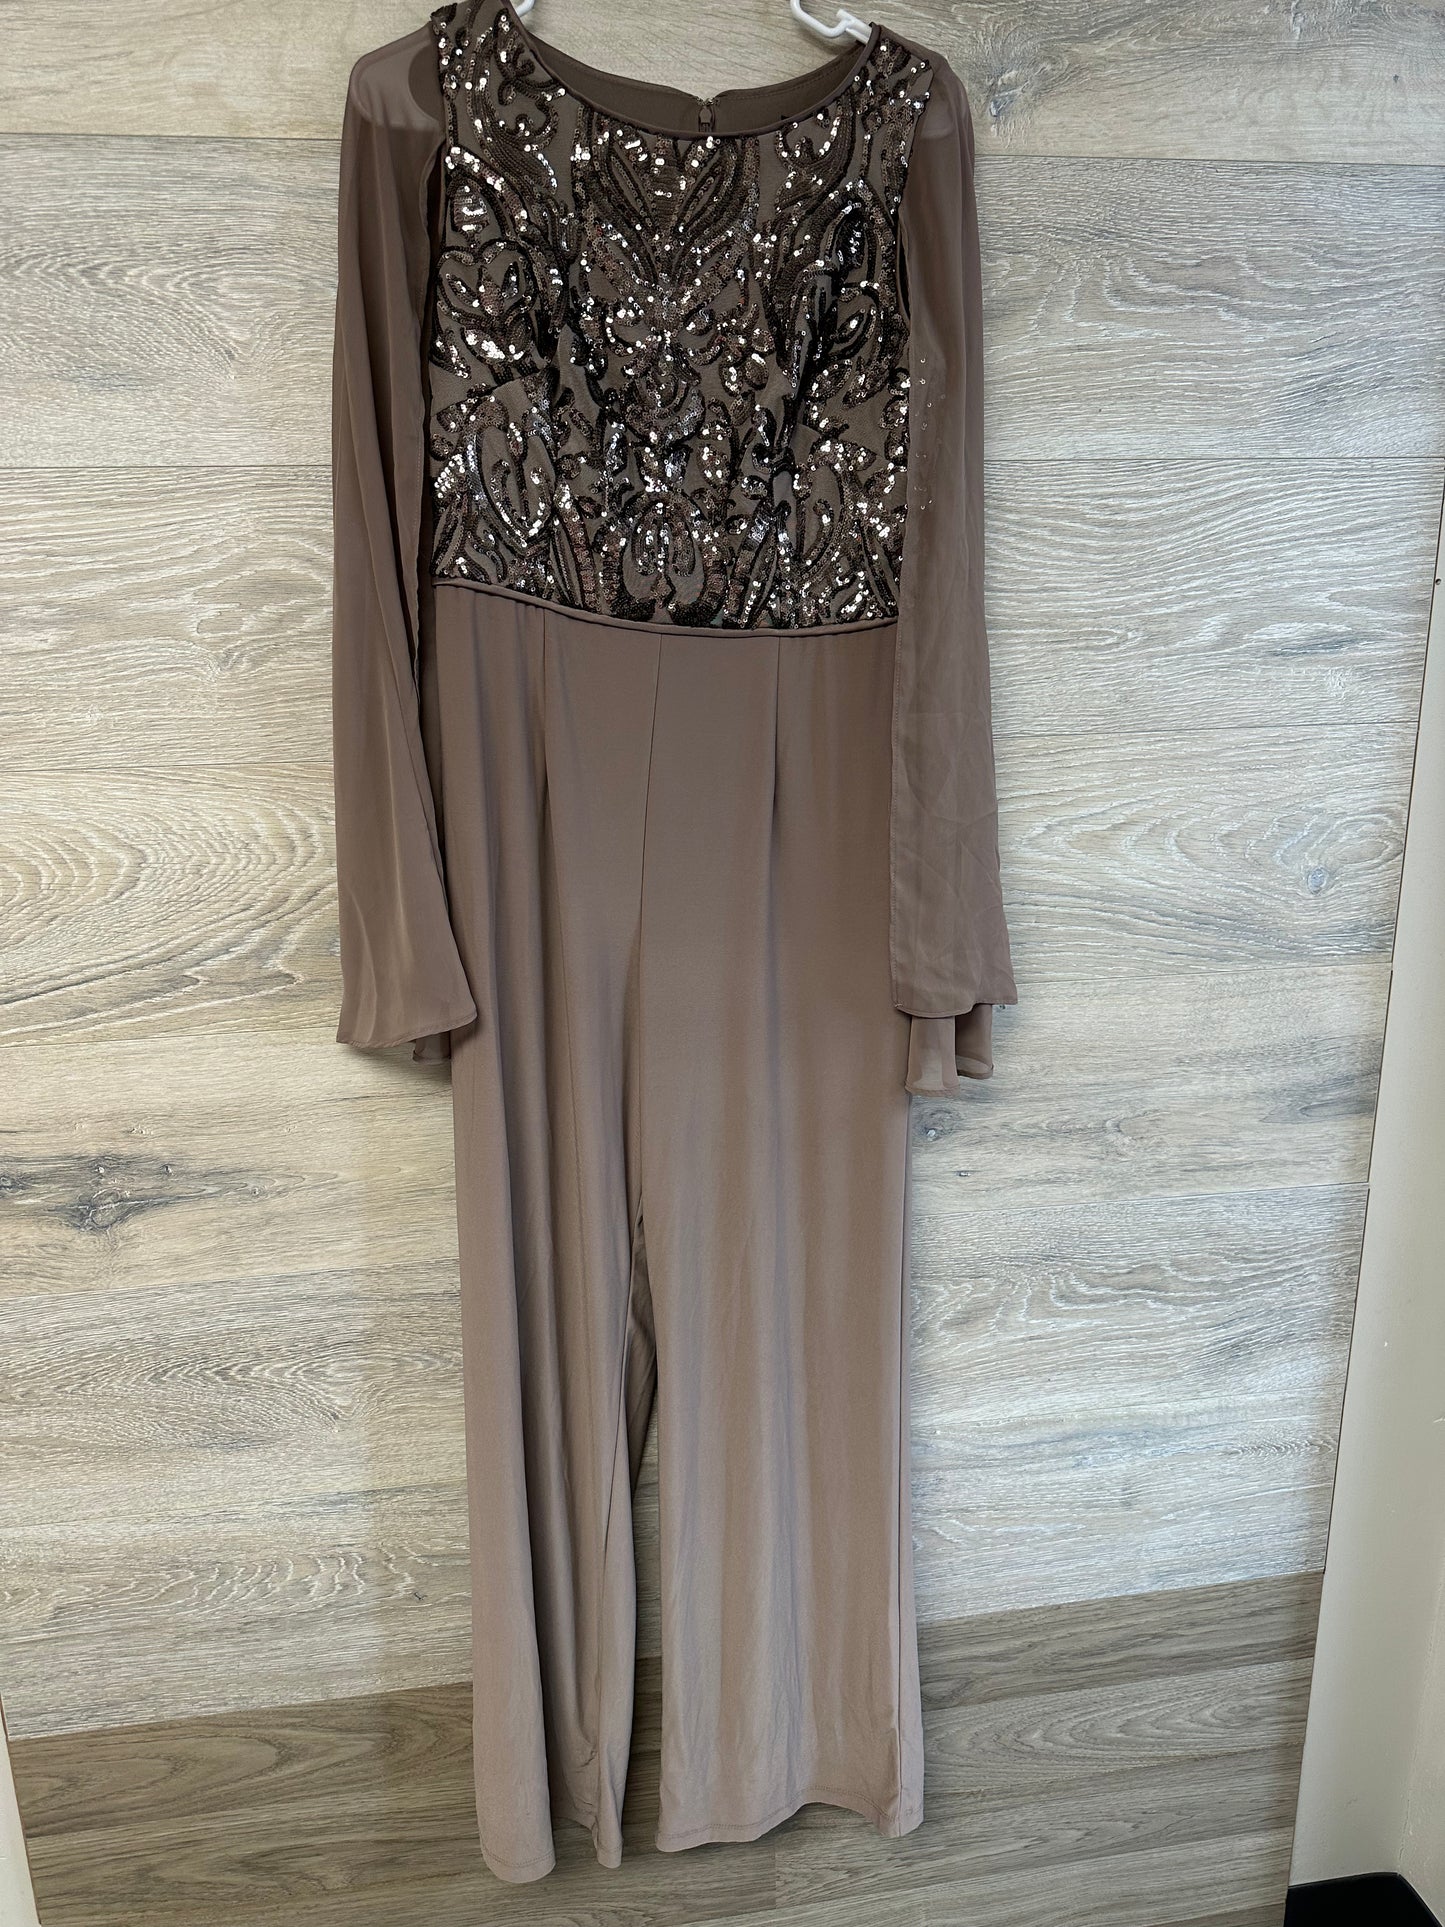 Chiffon Capelet Jumpsuit with Sequin Bodice size 6 NWOT